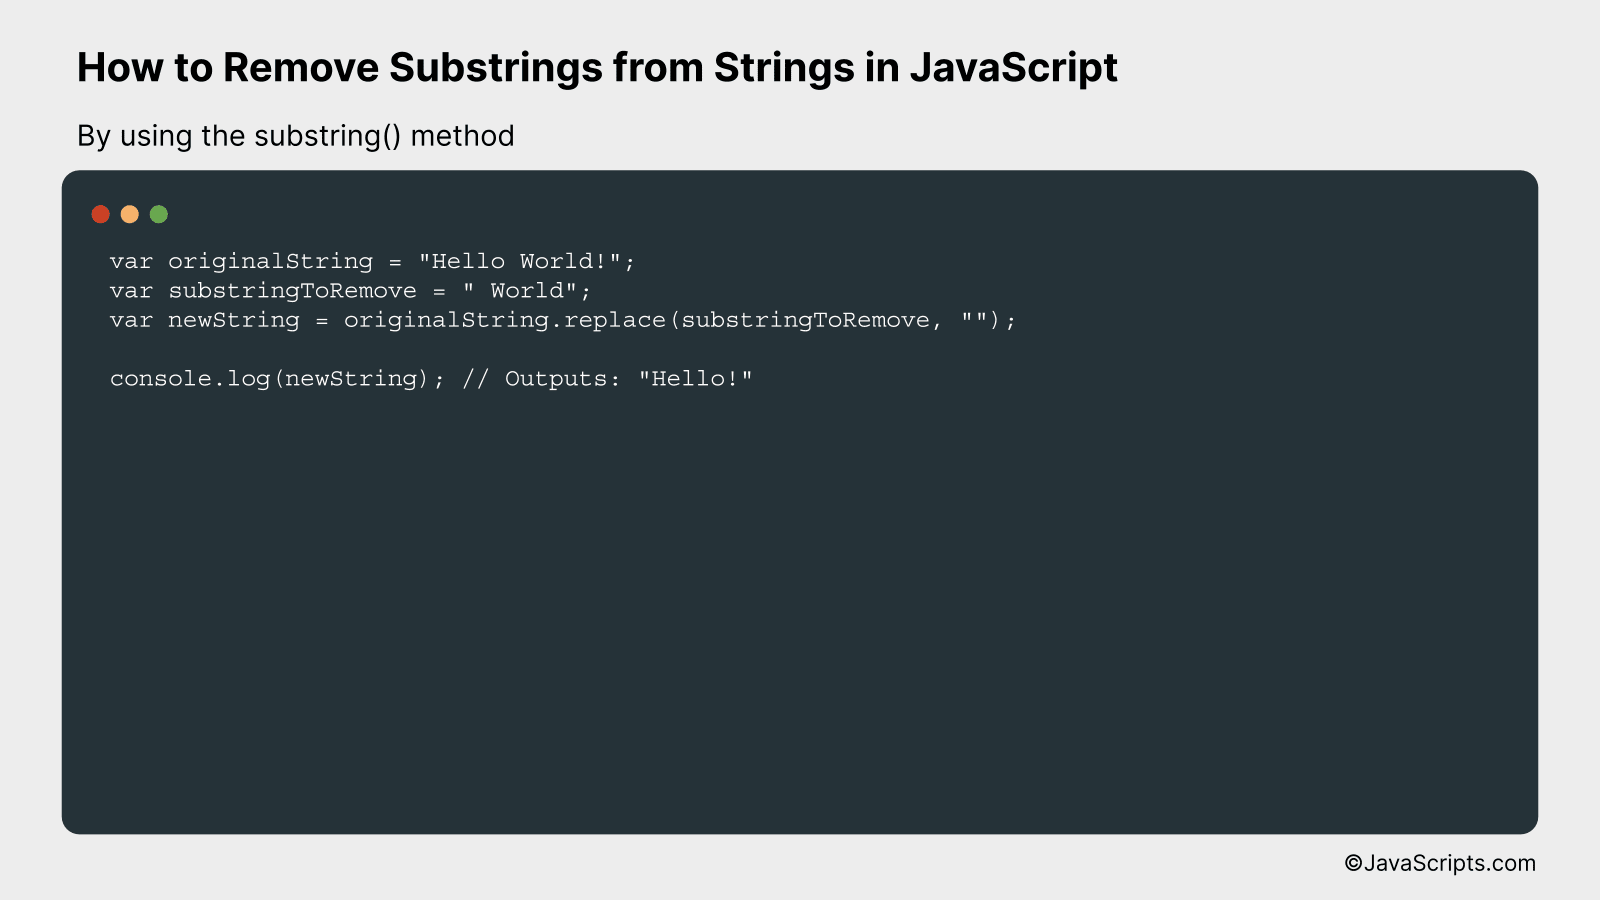 By using the substring() method